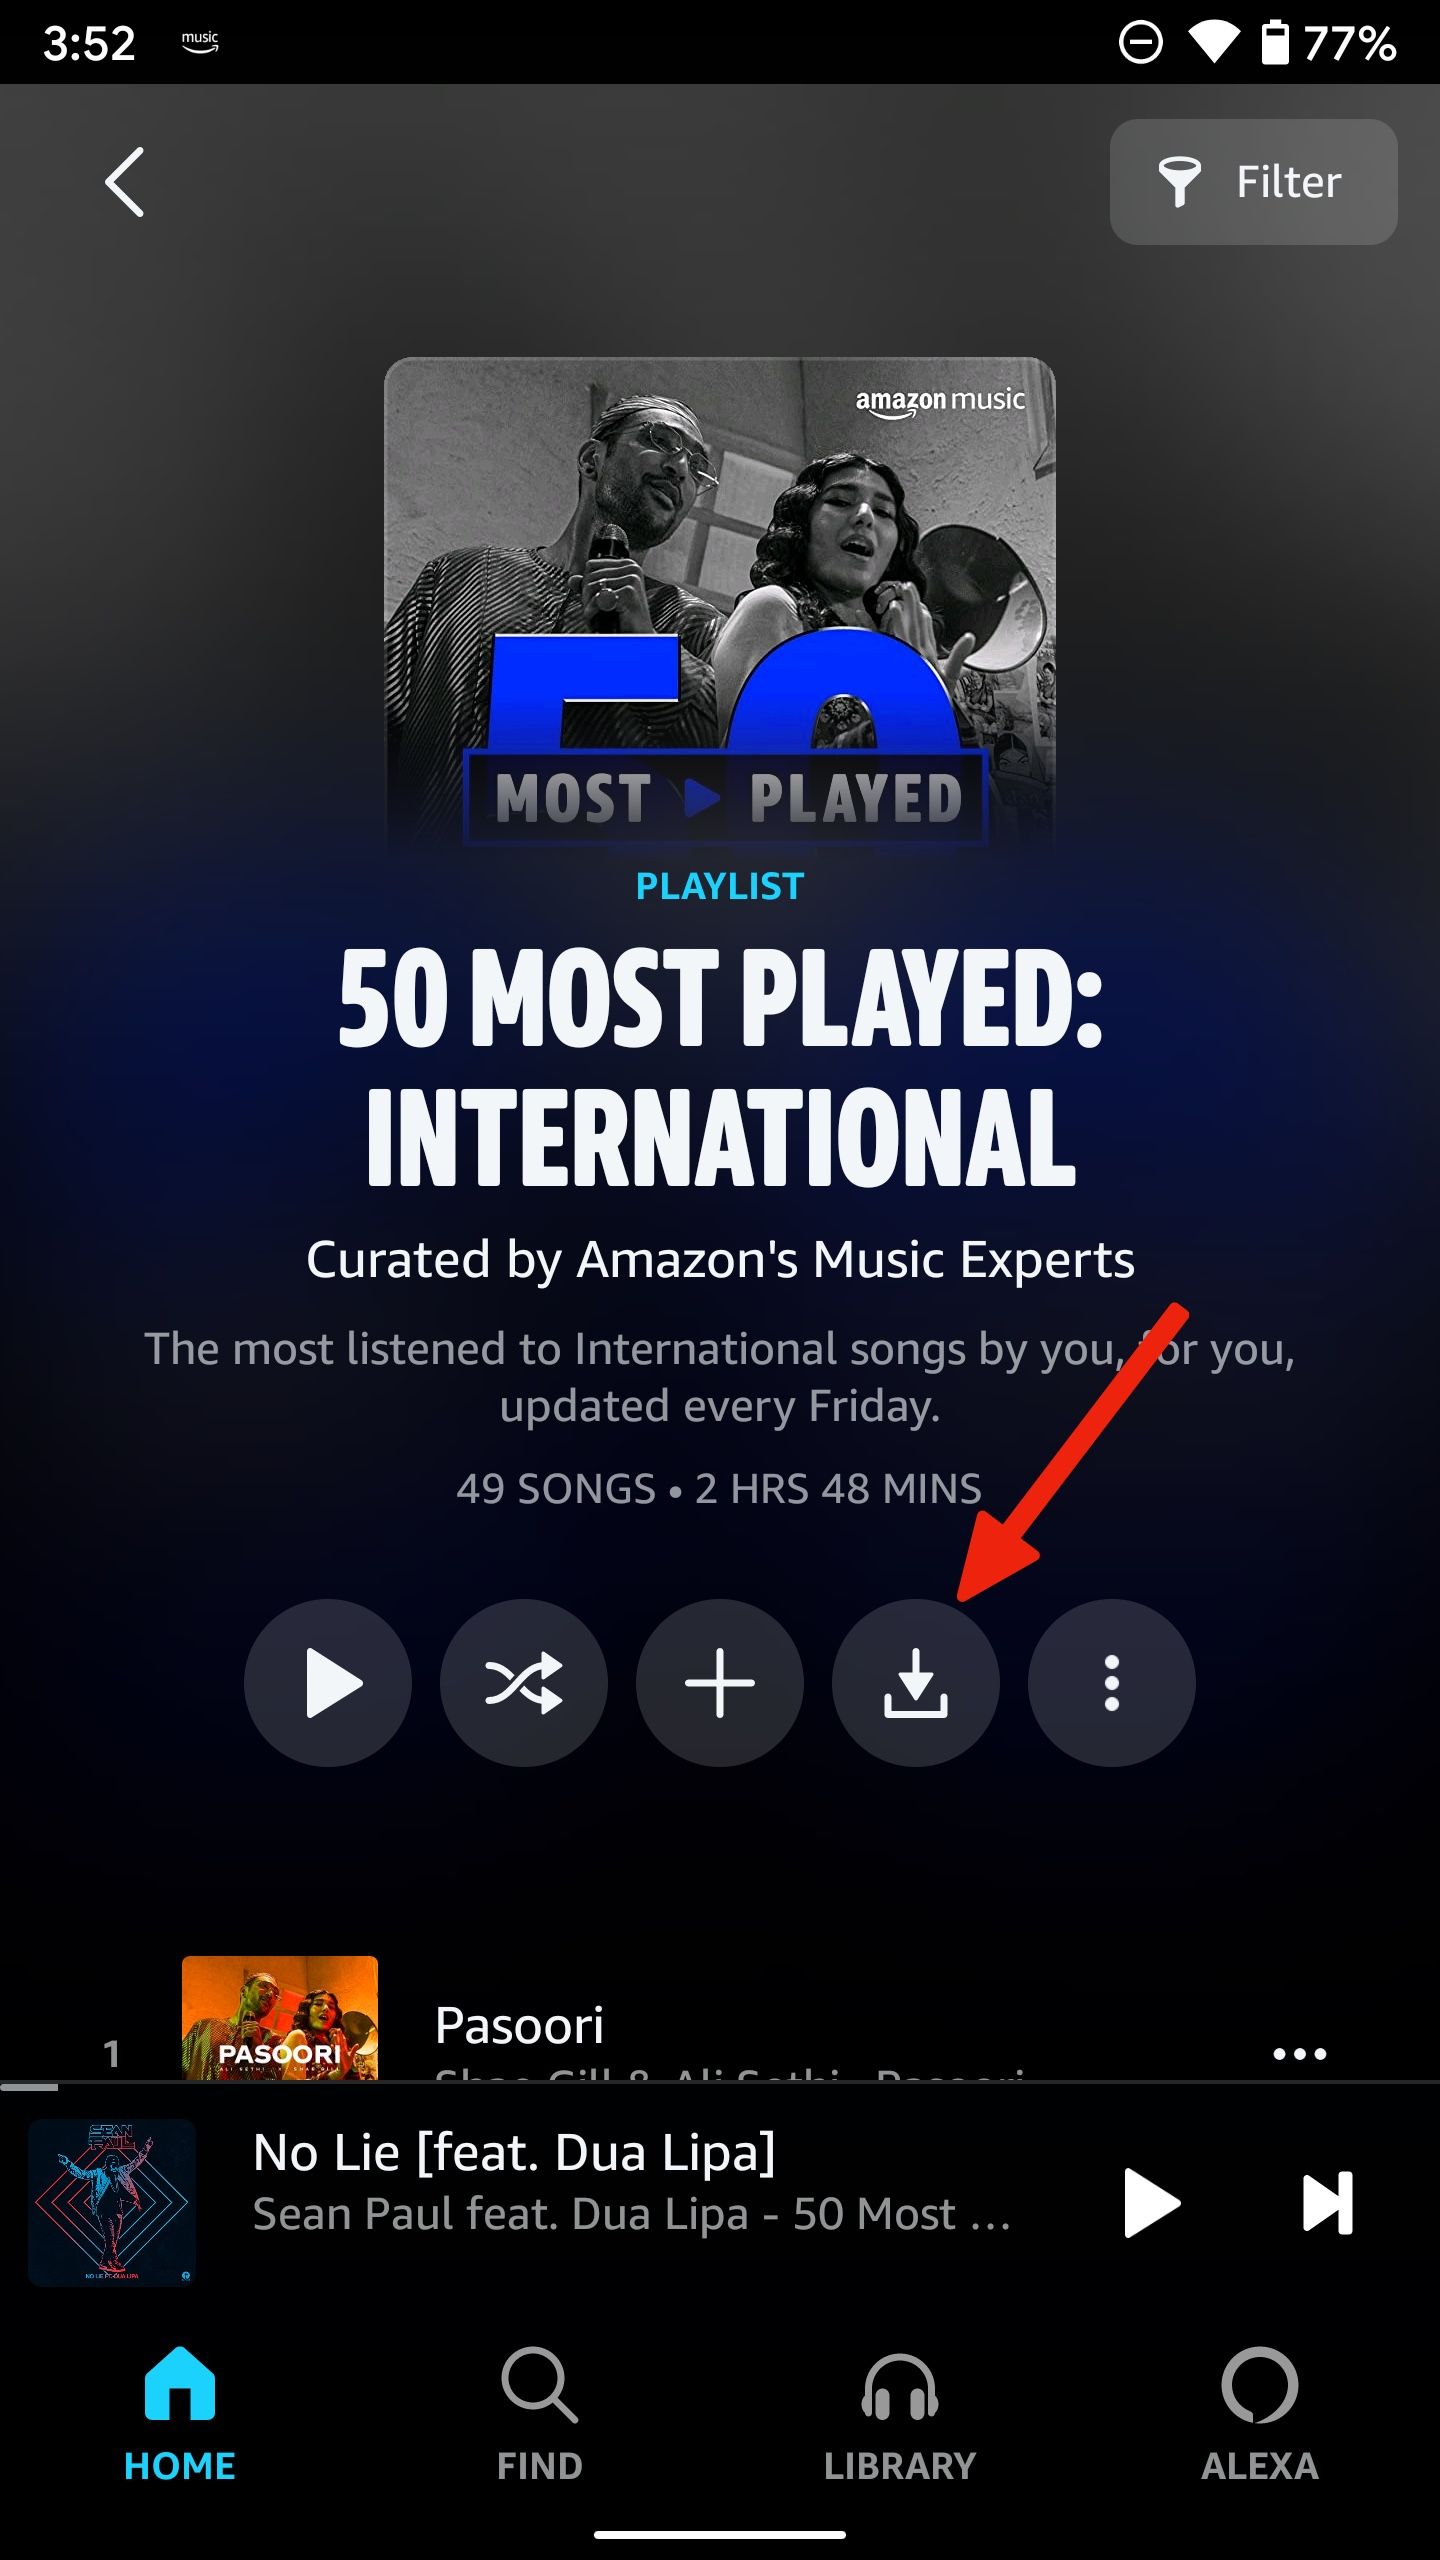 Shows the page for a specific playlist in the Amazon Music app with an arrow pointing to the download icon.